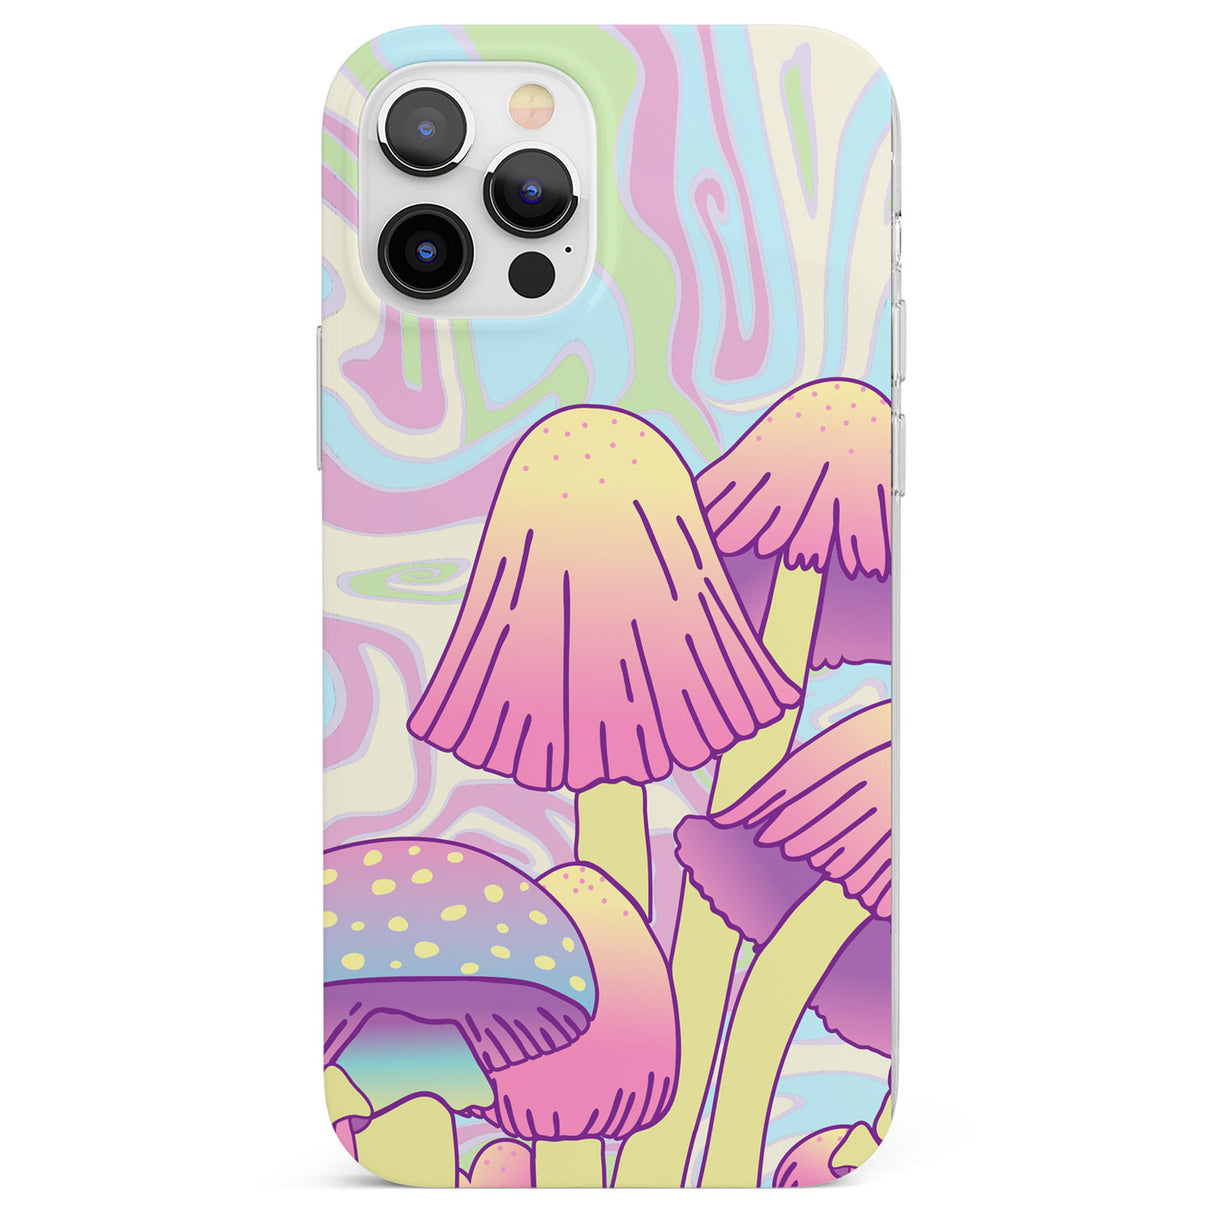 Shroomin' Phone Case for iPhone 12 Pro